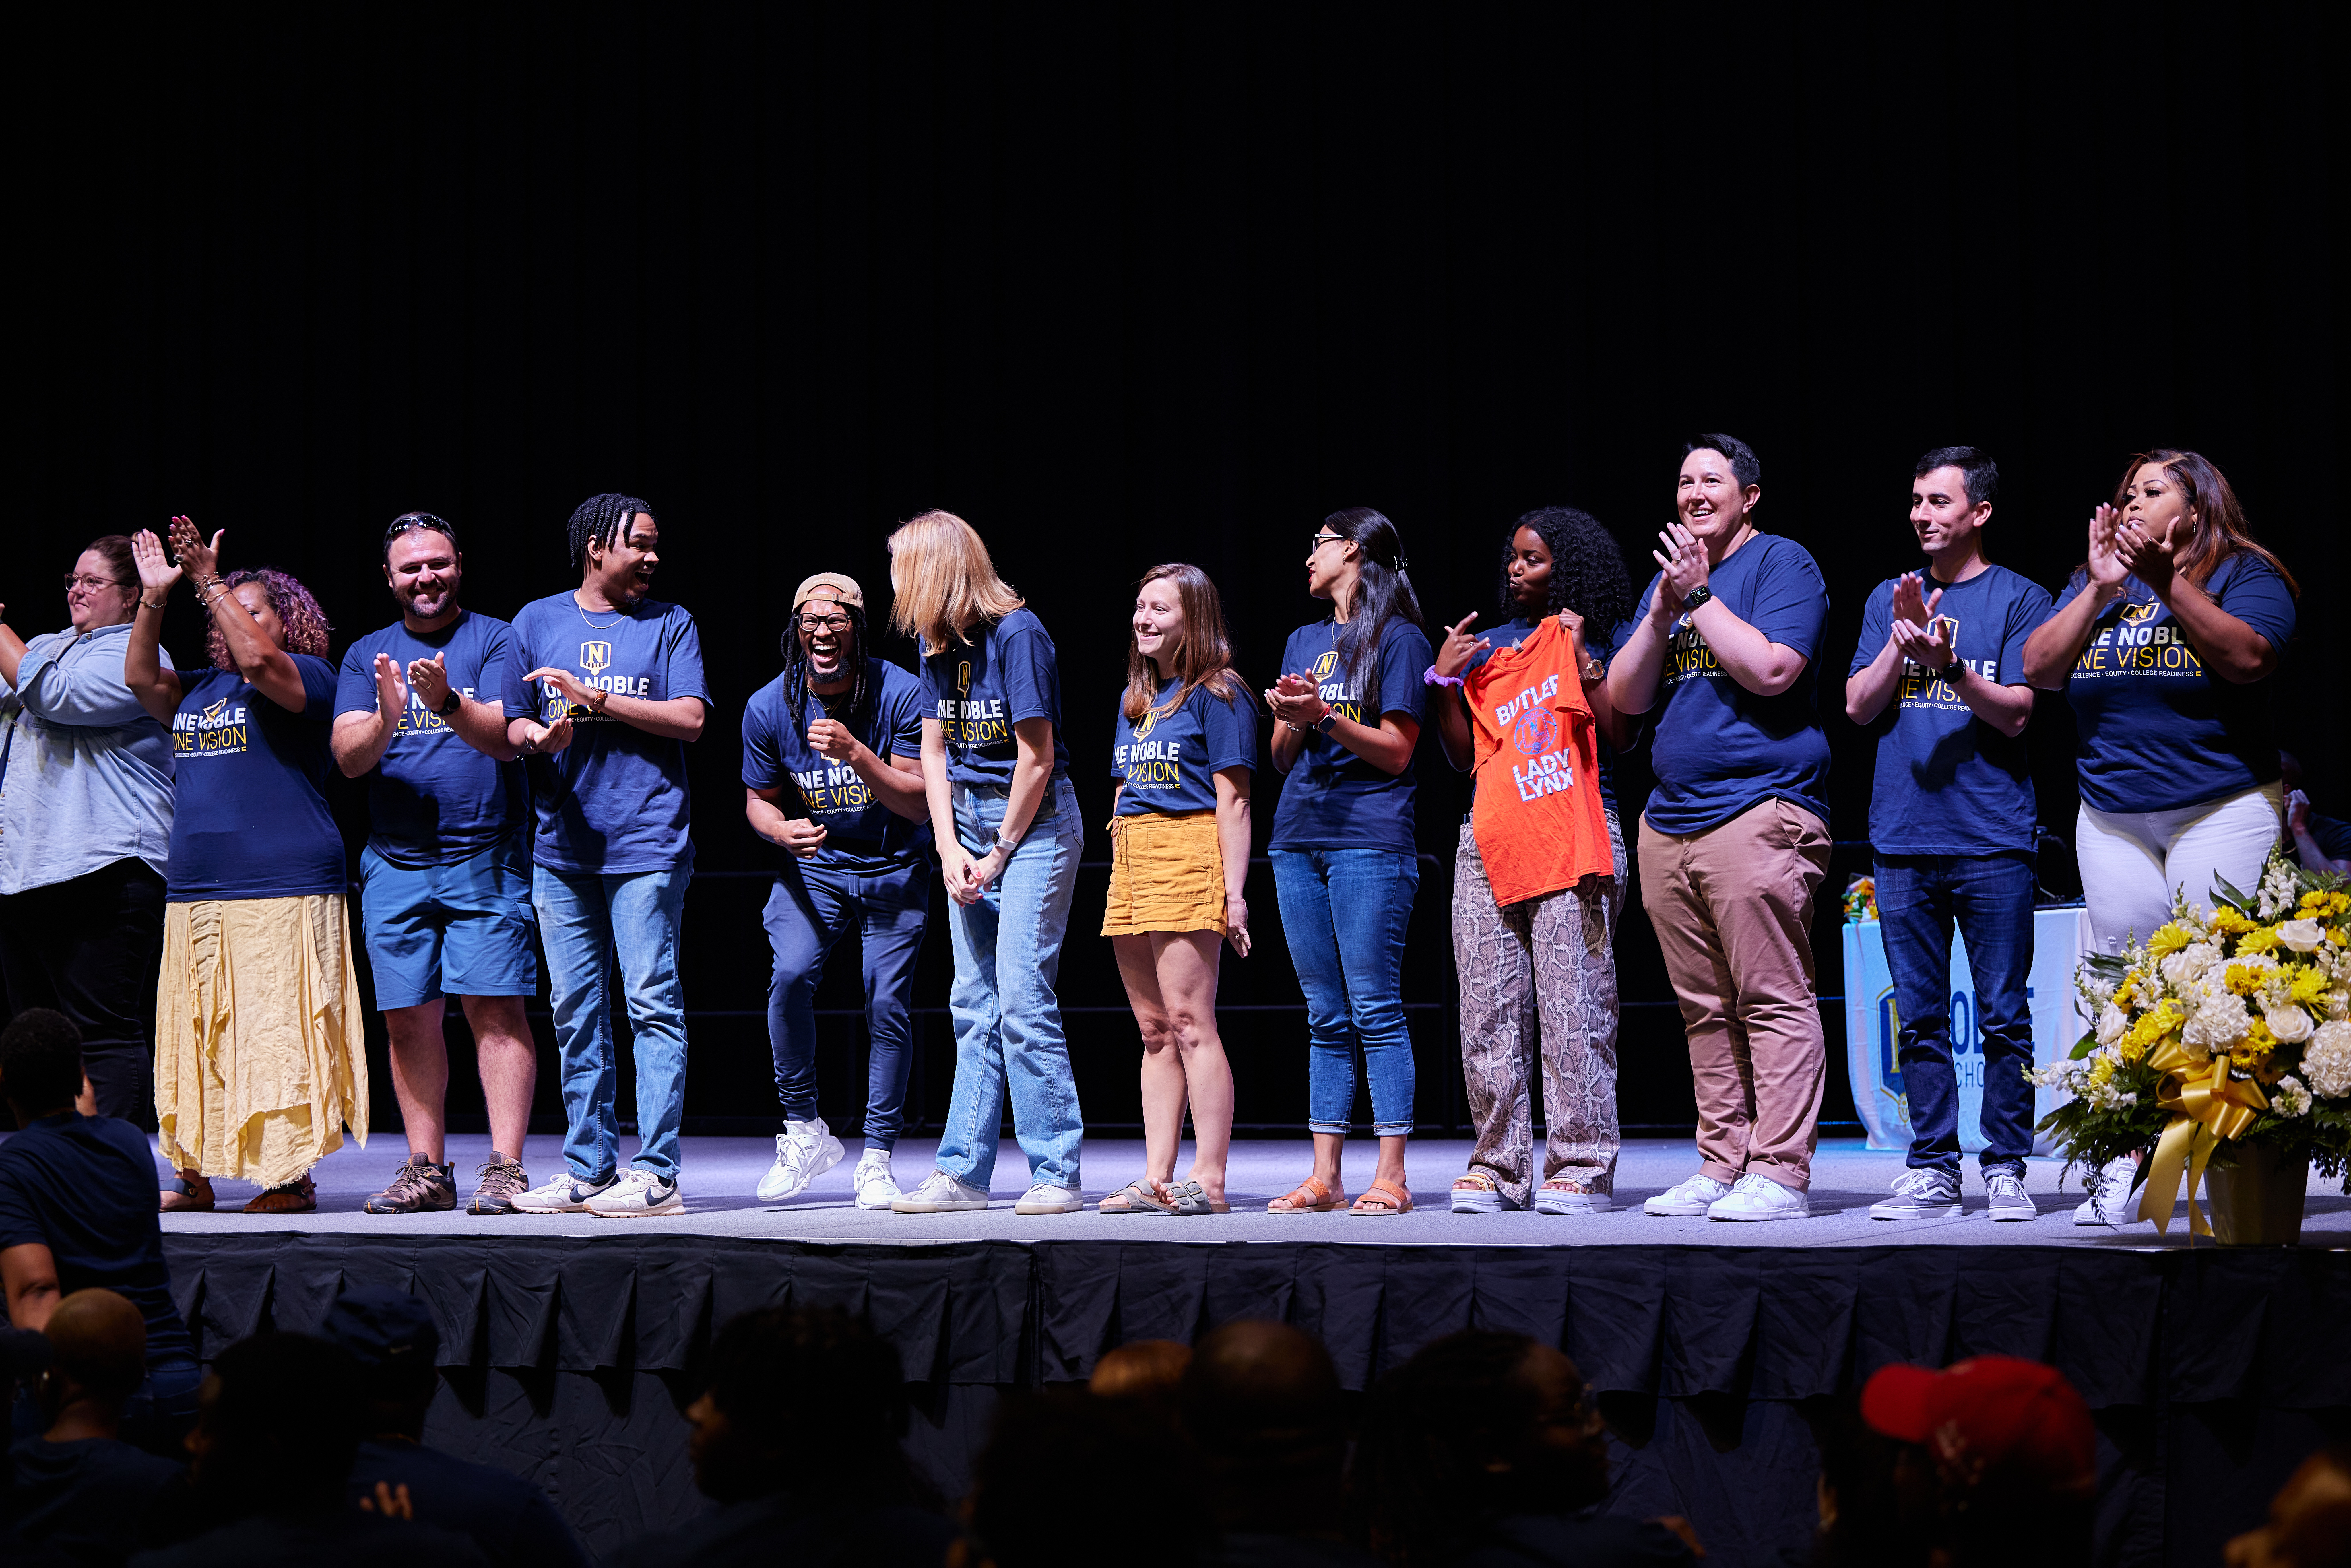 Photo shows a wide shot of the entire Noble Schools' Distinguished Teacher 2023 cohort lined up on stage. They are all smiling and clapping as they are surprised to be honored at the kickoff event.